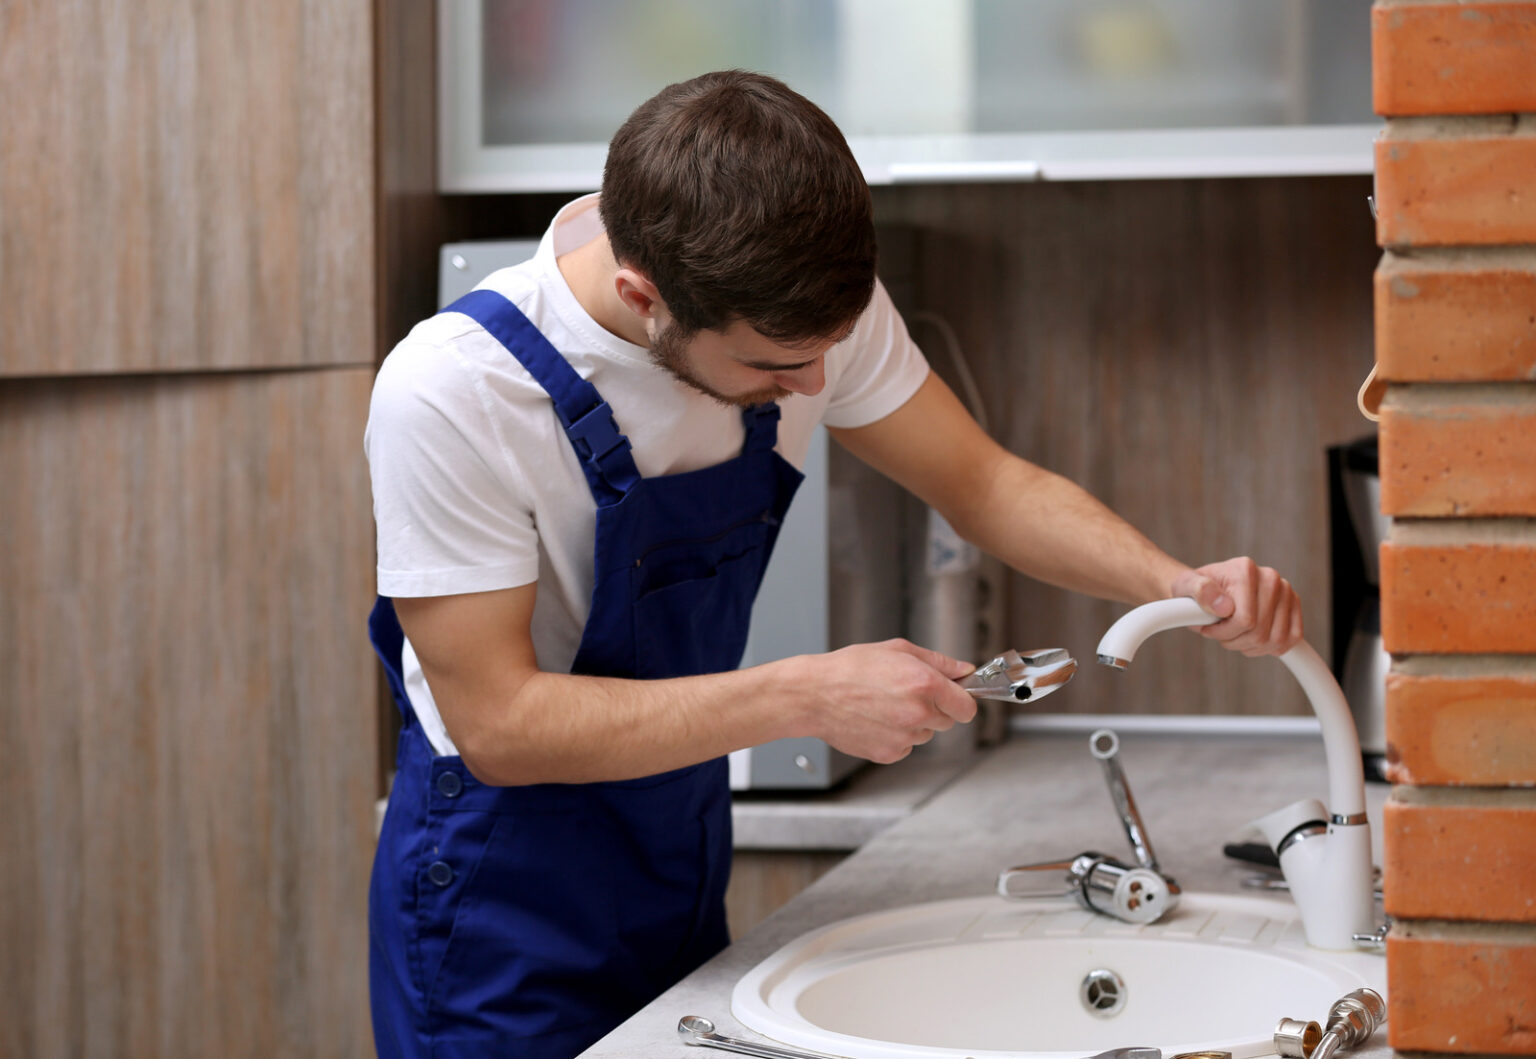 Sink Repair vs. Replacement: Which is Best for Your Budget?